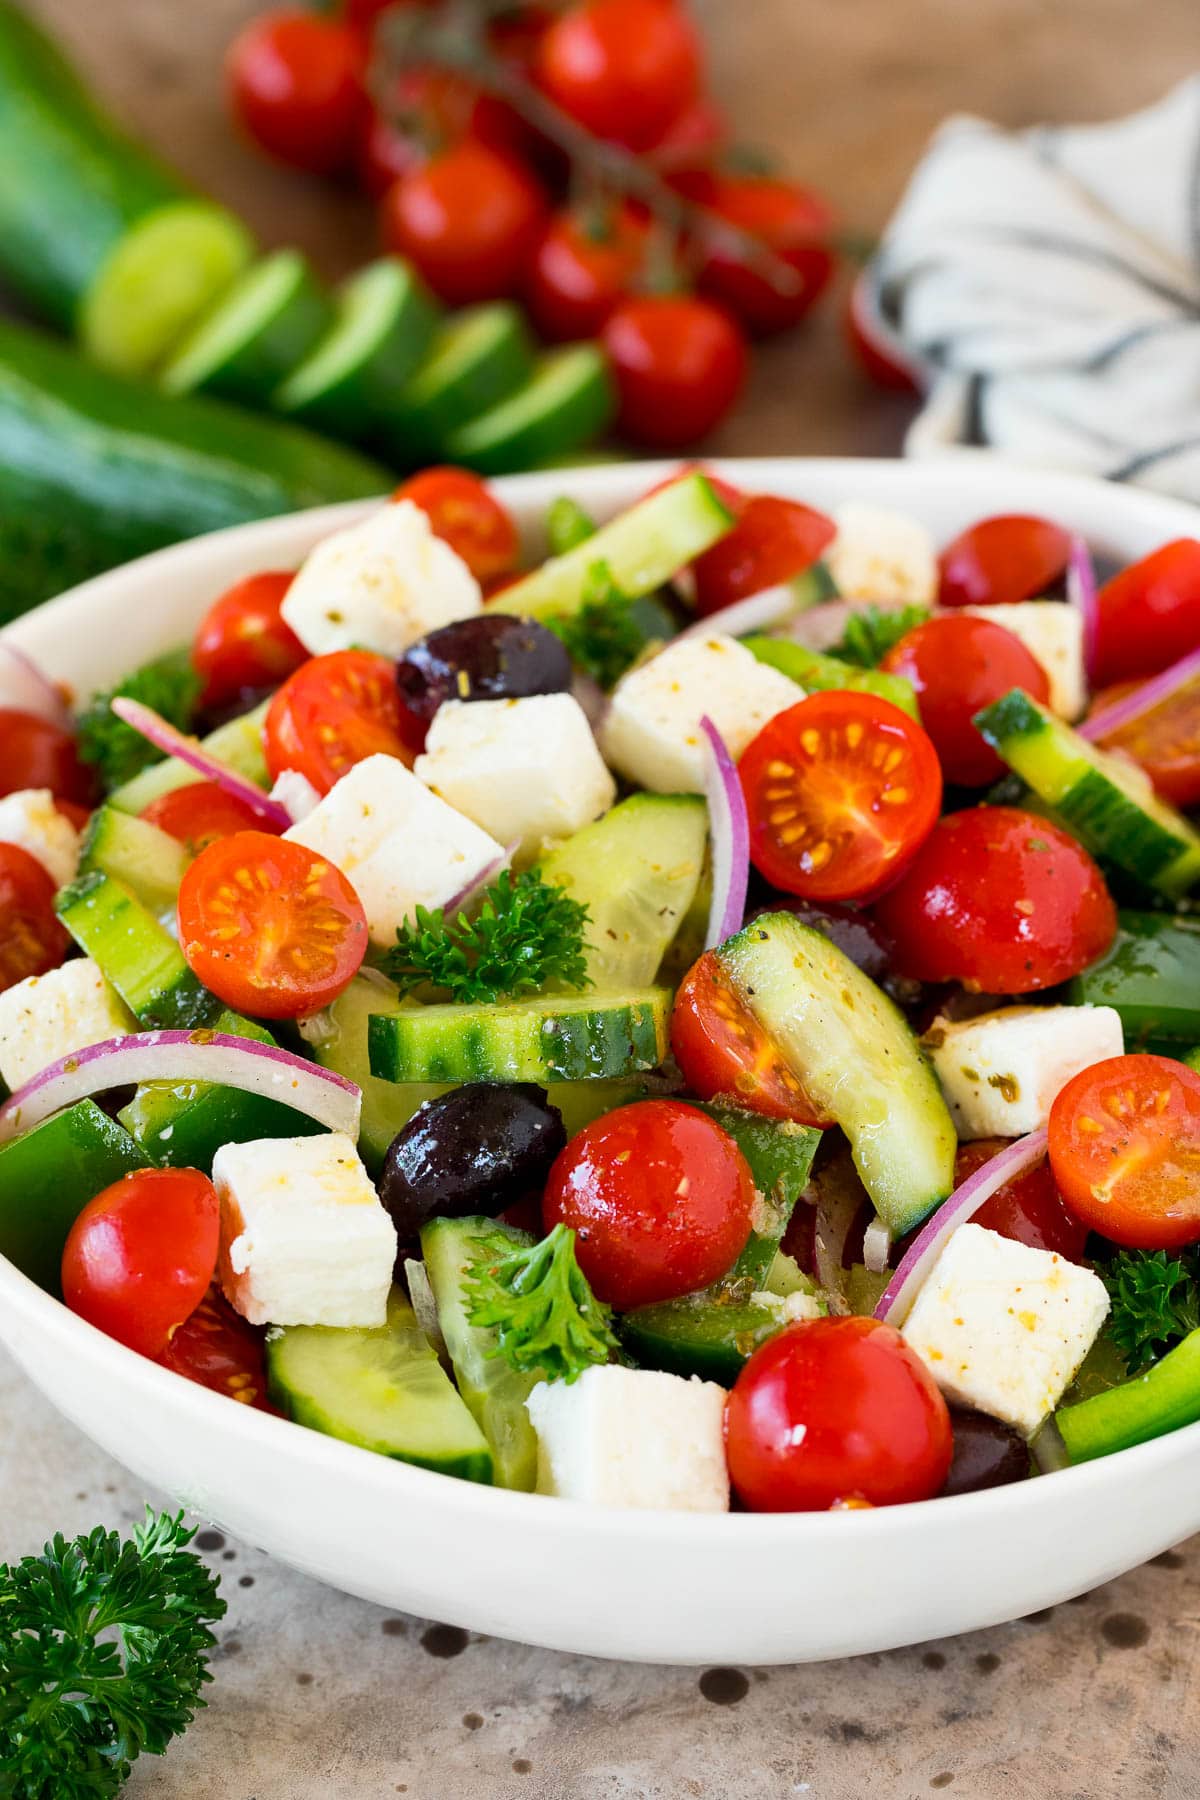 A chopped Greek salad with cucumbers, tomatoes and feta cheese.